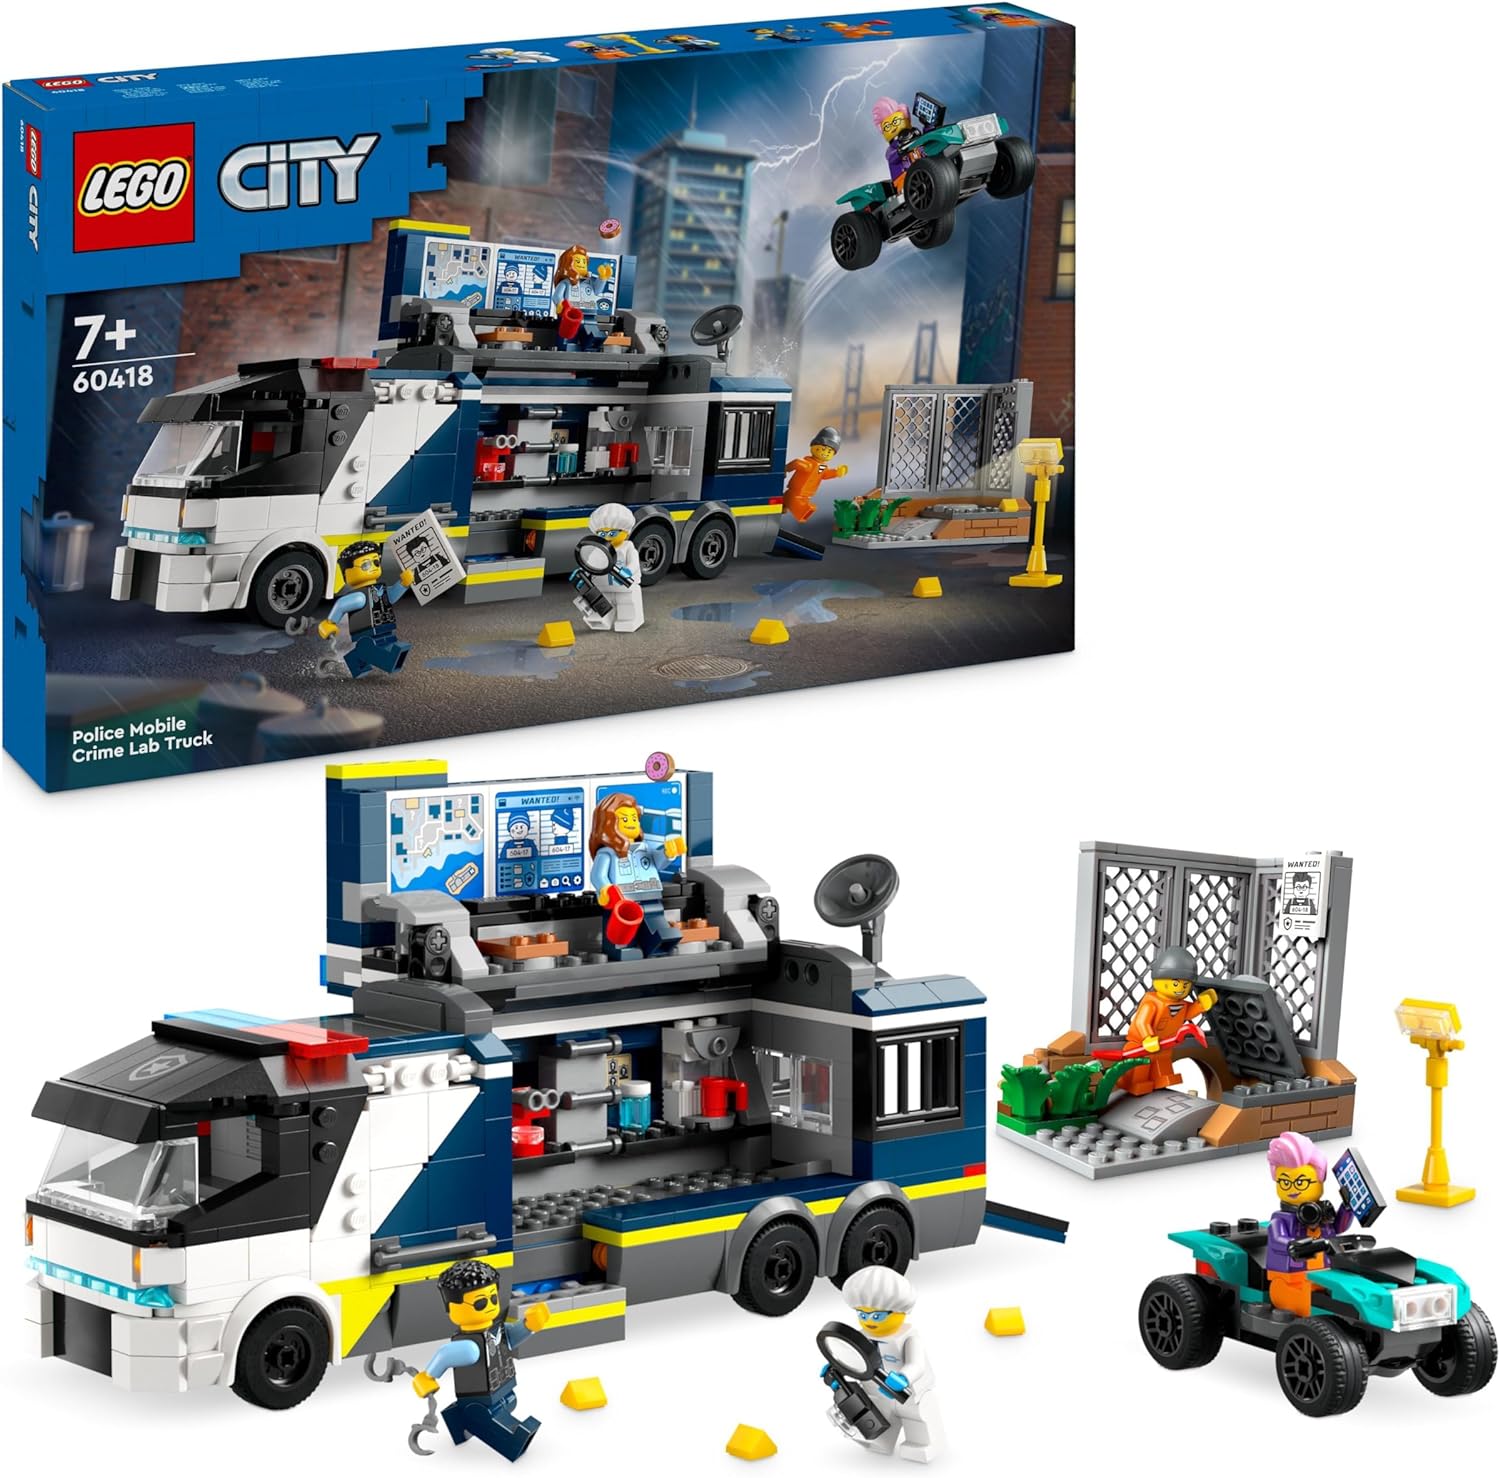 LEGO City Police Print with Laboratory, Police Set with Quad and Truck Toy for Children, Gift for Boys and Girls from 7 Years, Plus 5 Mini Figures - 2 Police Officers, 1 Scientist and 2 Crooks 60418